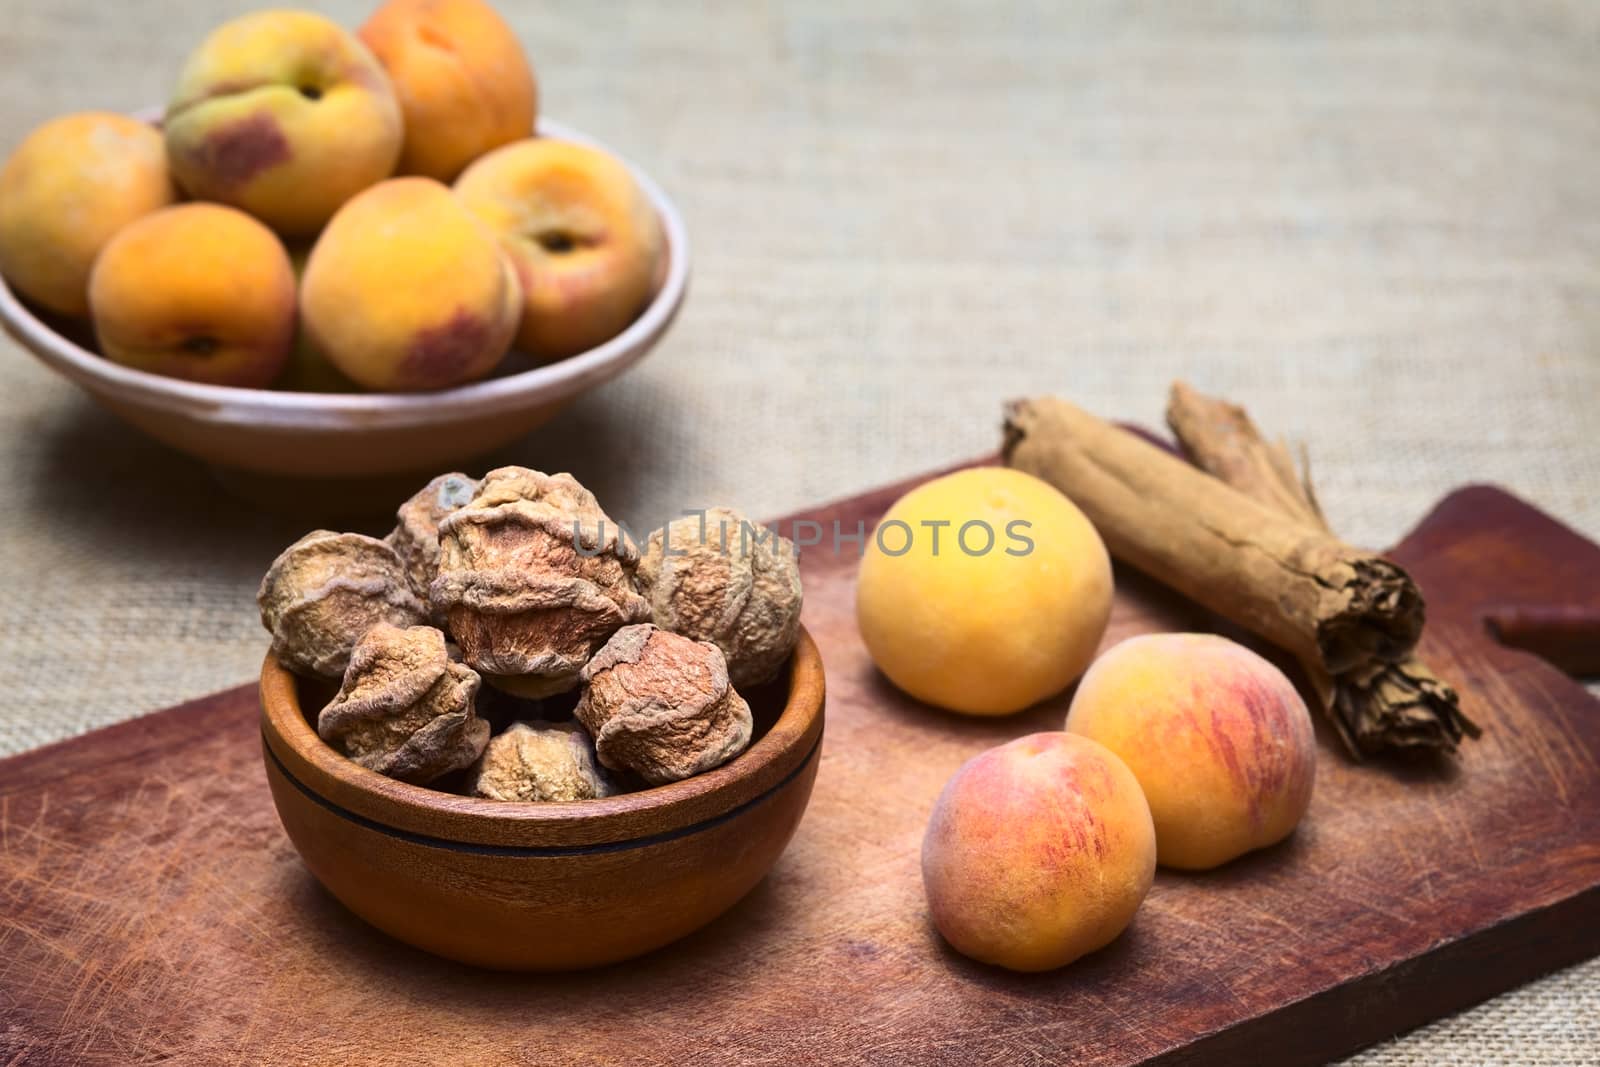 Dried peeled peach called quisa (also kisa, mocochinchi) from which a beverage is prepared with sugar and cinnamon in Bolivia. The drink is very popular and sold on the streets in Bolivia (Photographed with natural light) (Selective Focus, Focus on the front peaches)
 